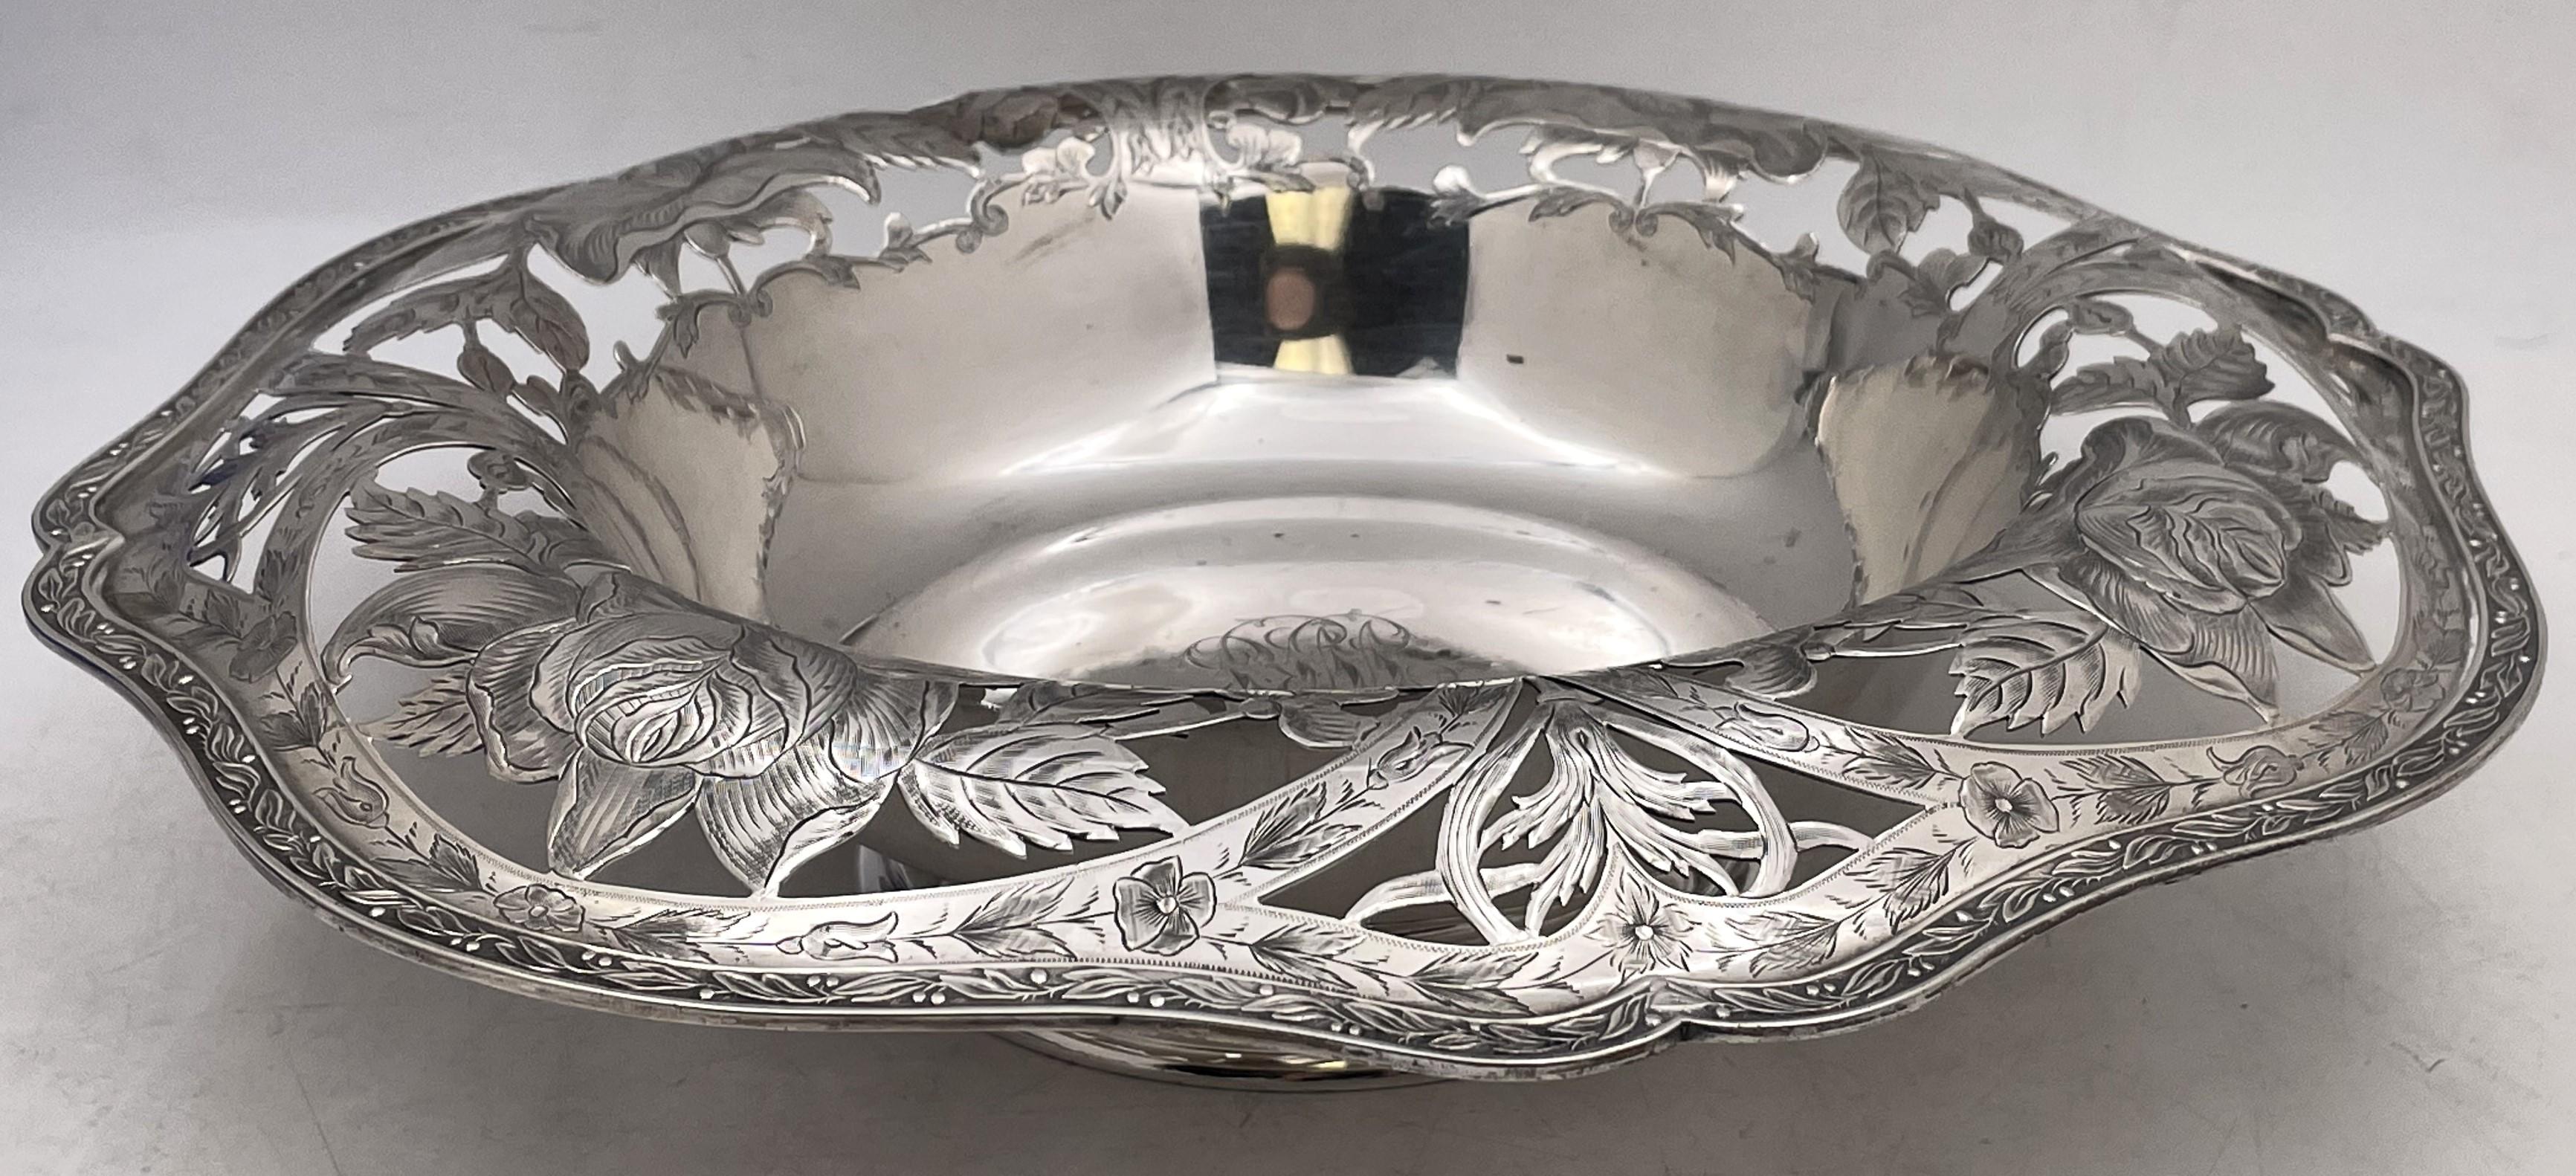 LudwiRedlich sterling silver centerpiece bowl from the early 1890s with a pierced rim adorned with floral motifs and in Art Nouveau style. It measures 12 7/8'' in diameter (inner diameter 7 7/8'') by 3 1/4'' in height, weighs 26 troy ounces, and